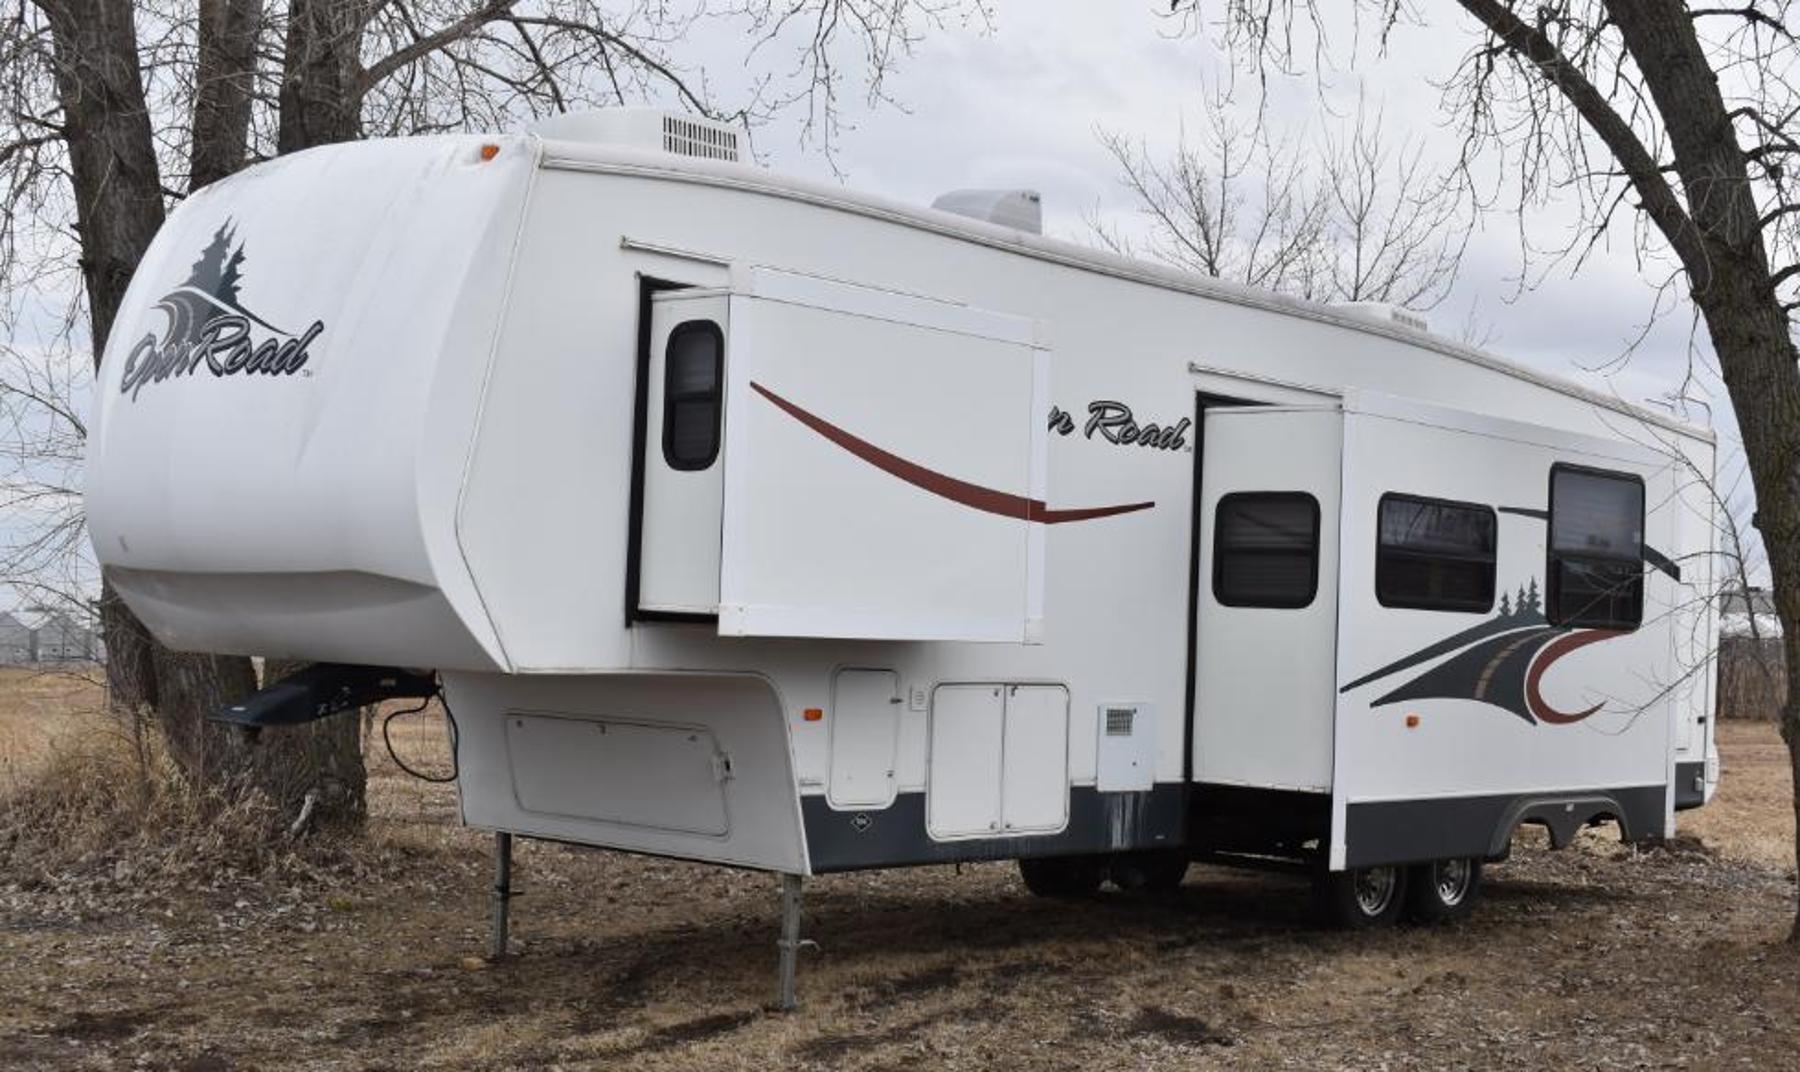 36 Units: (2) Toy Haulers, (1) Motorhome, (3) Vehicles, (1) Pickup Topper, (13) 5th Wheel Trailers, & (16) Travel Trailers